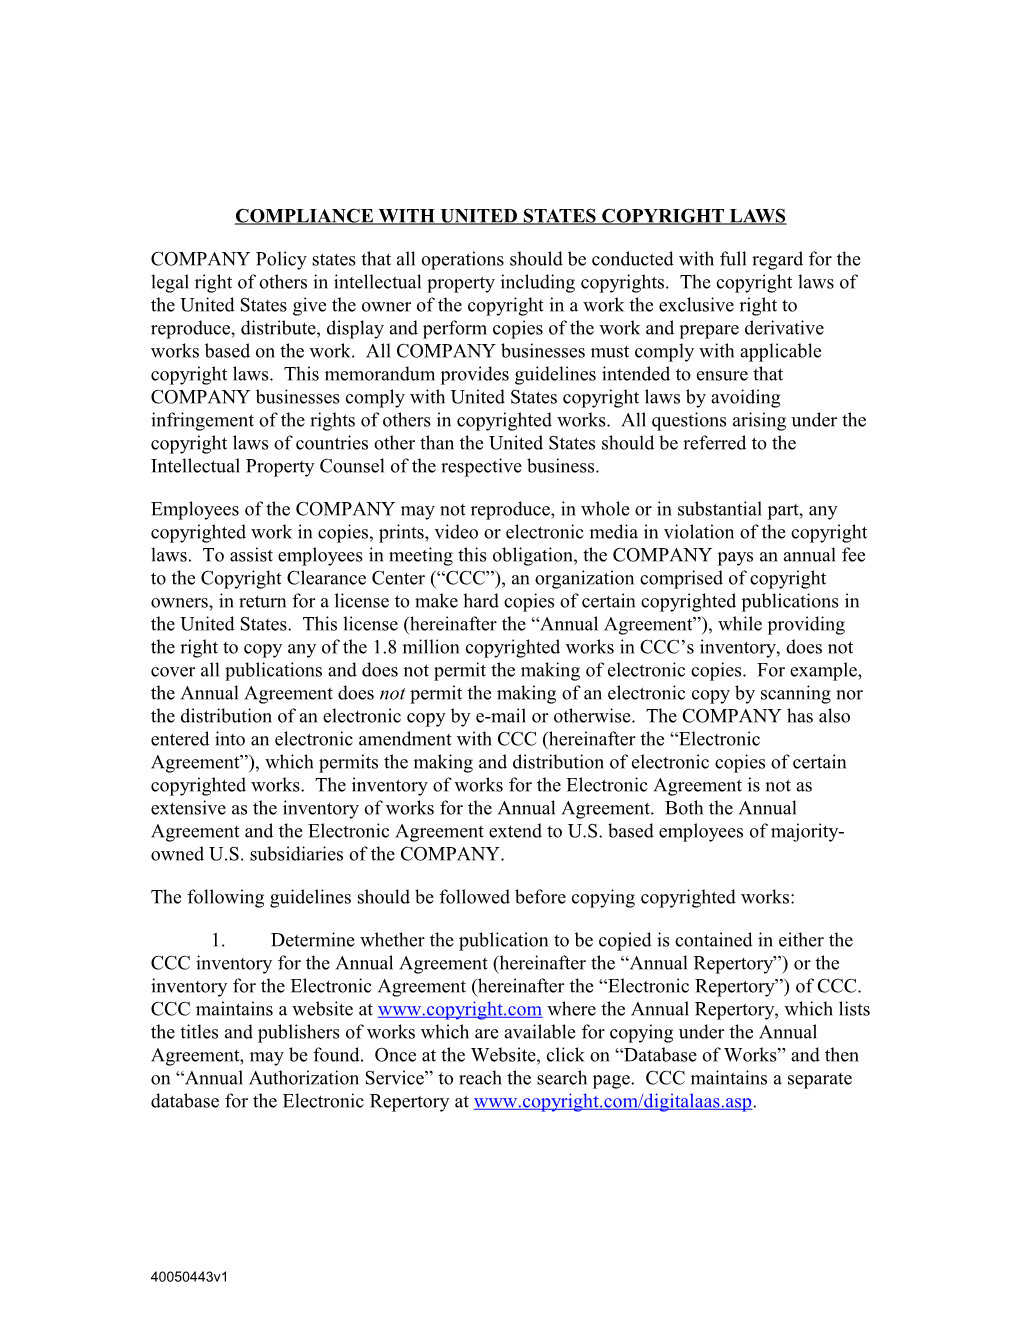 Compliance with United States Copyright Laws